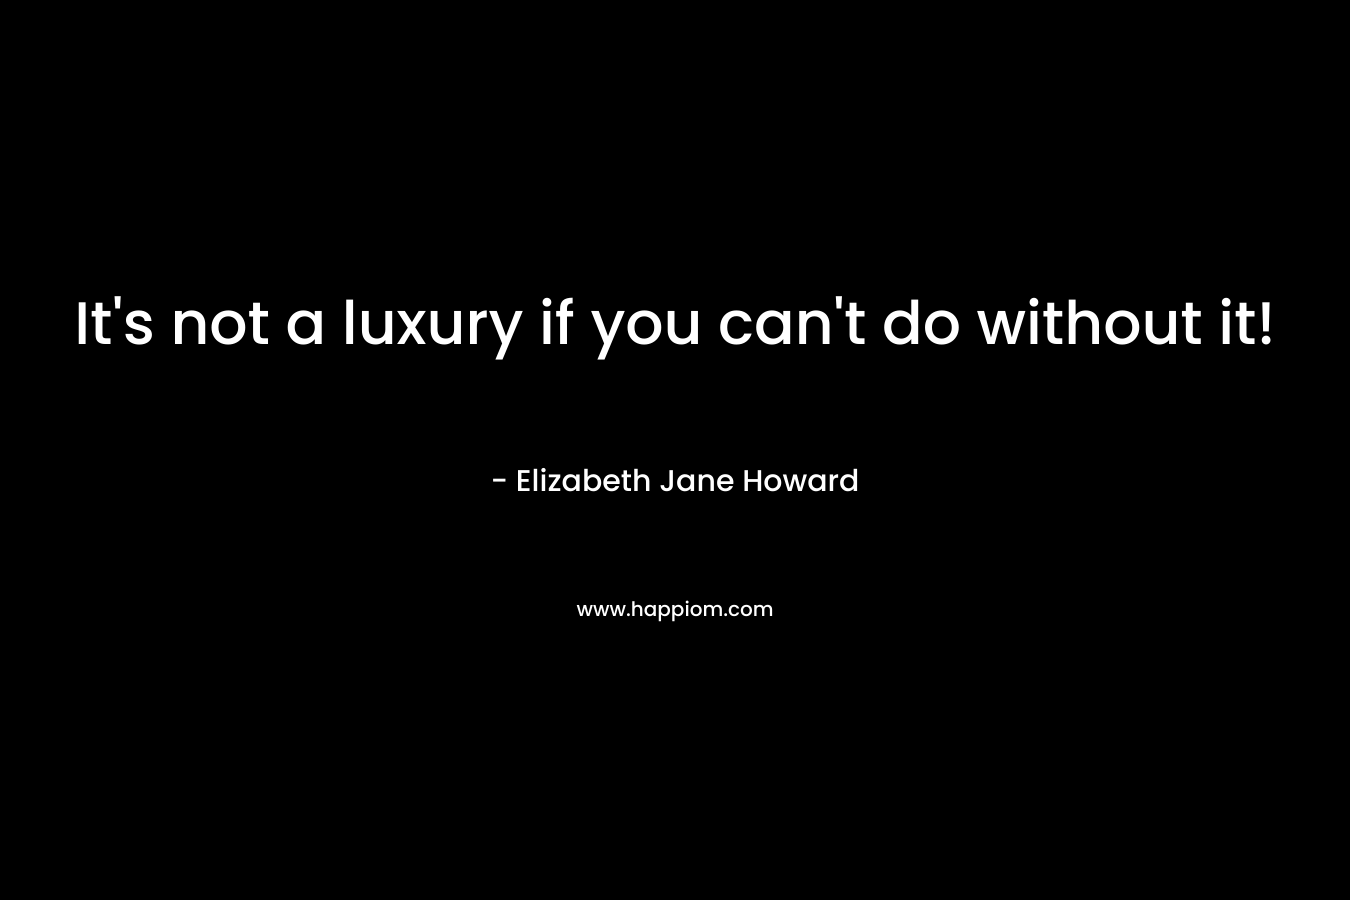 It’s not a luxury if you can’t do without it! – Elizabeth Jane Howard